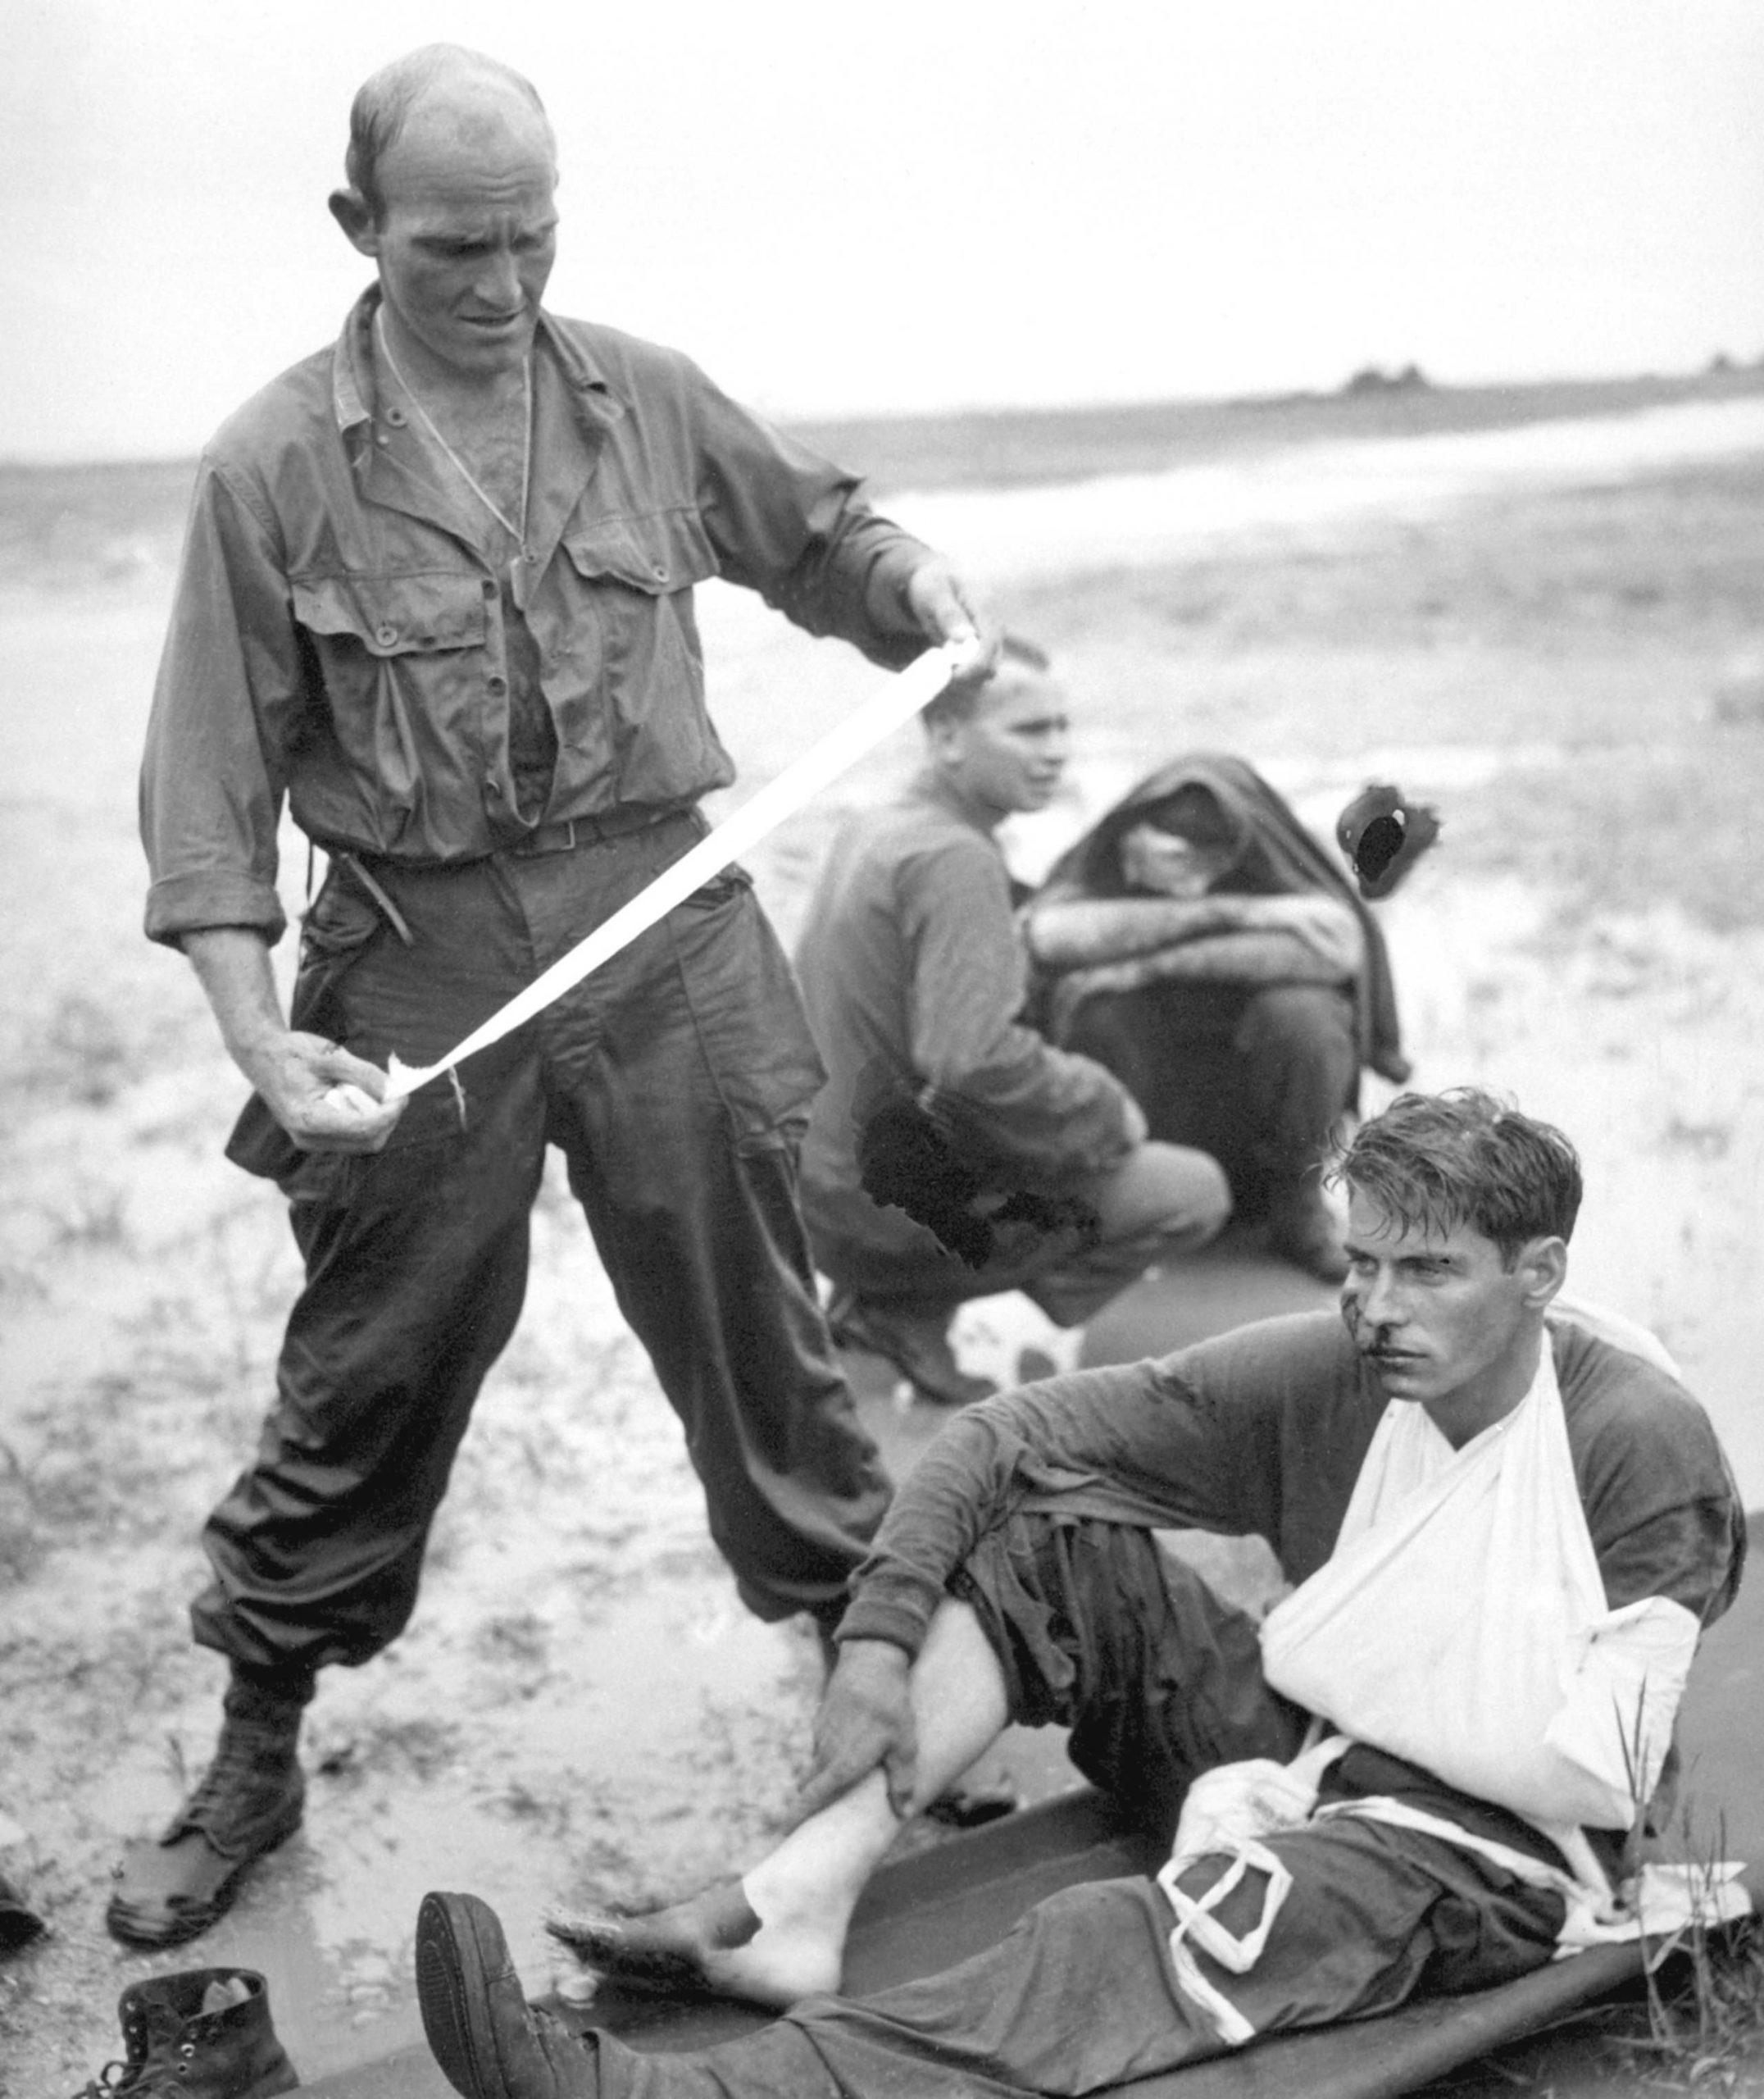 An American medic assists a wounded